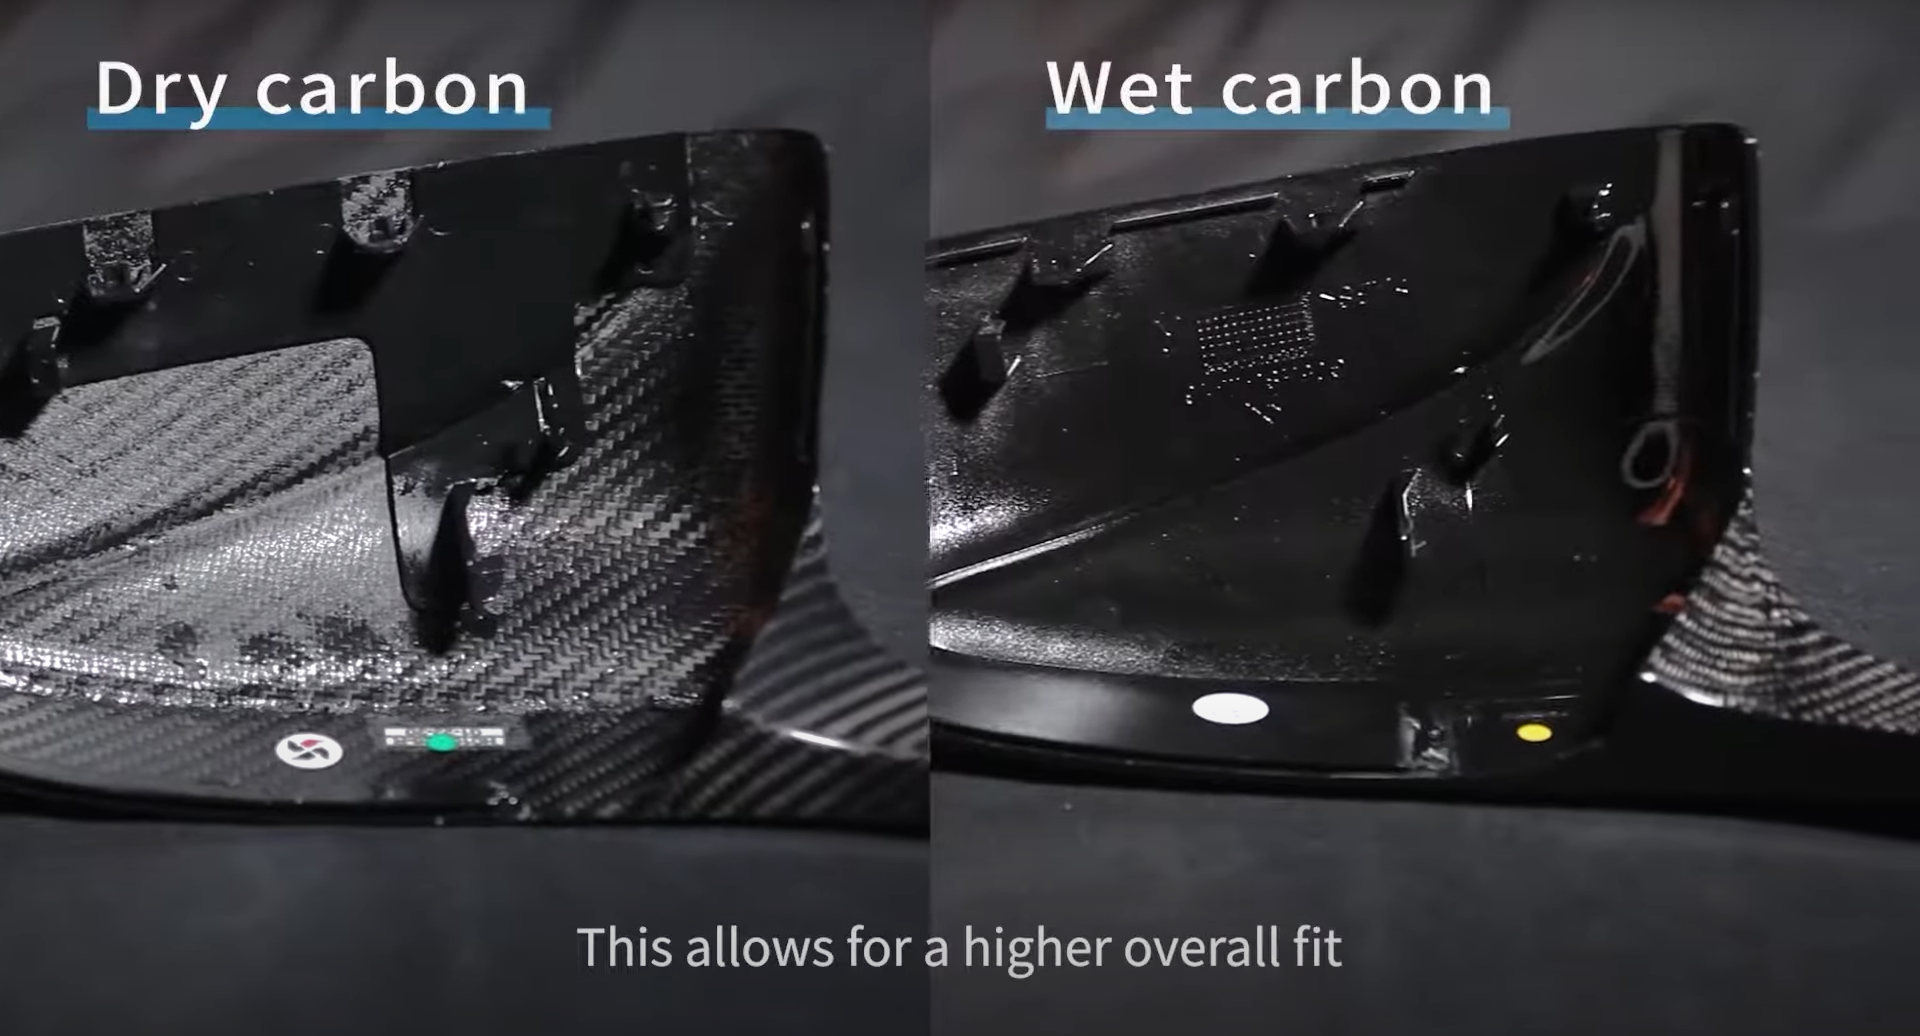 The resin cladding of wet carbon would turn yellow and deform under long-time sun exposure. No such problems would happen on dry carbon as it undergoes high temparature and pressure. Source: What's Different Between Dry Carbon and Wet Carbon Mirror Caps?